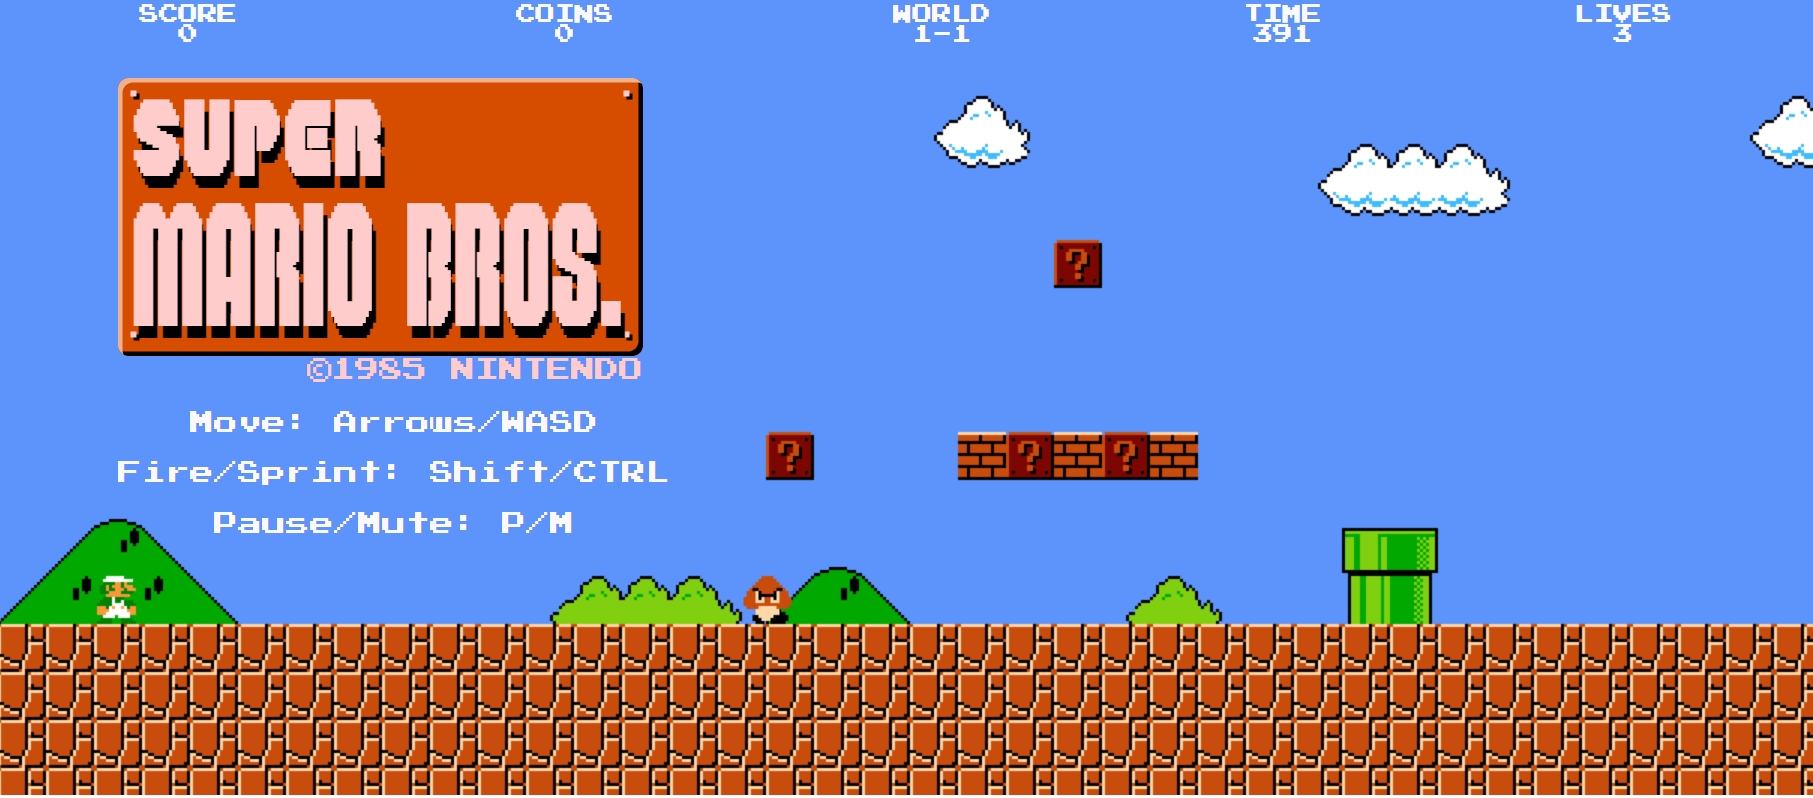 Super Mario Game Online MarioGames.be - Explore the Best Collection of Mario Games Online